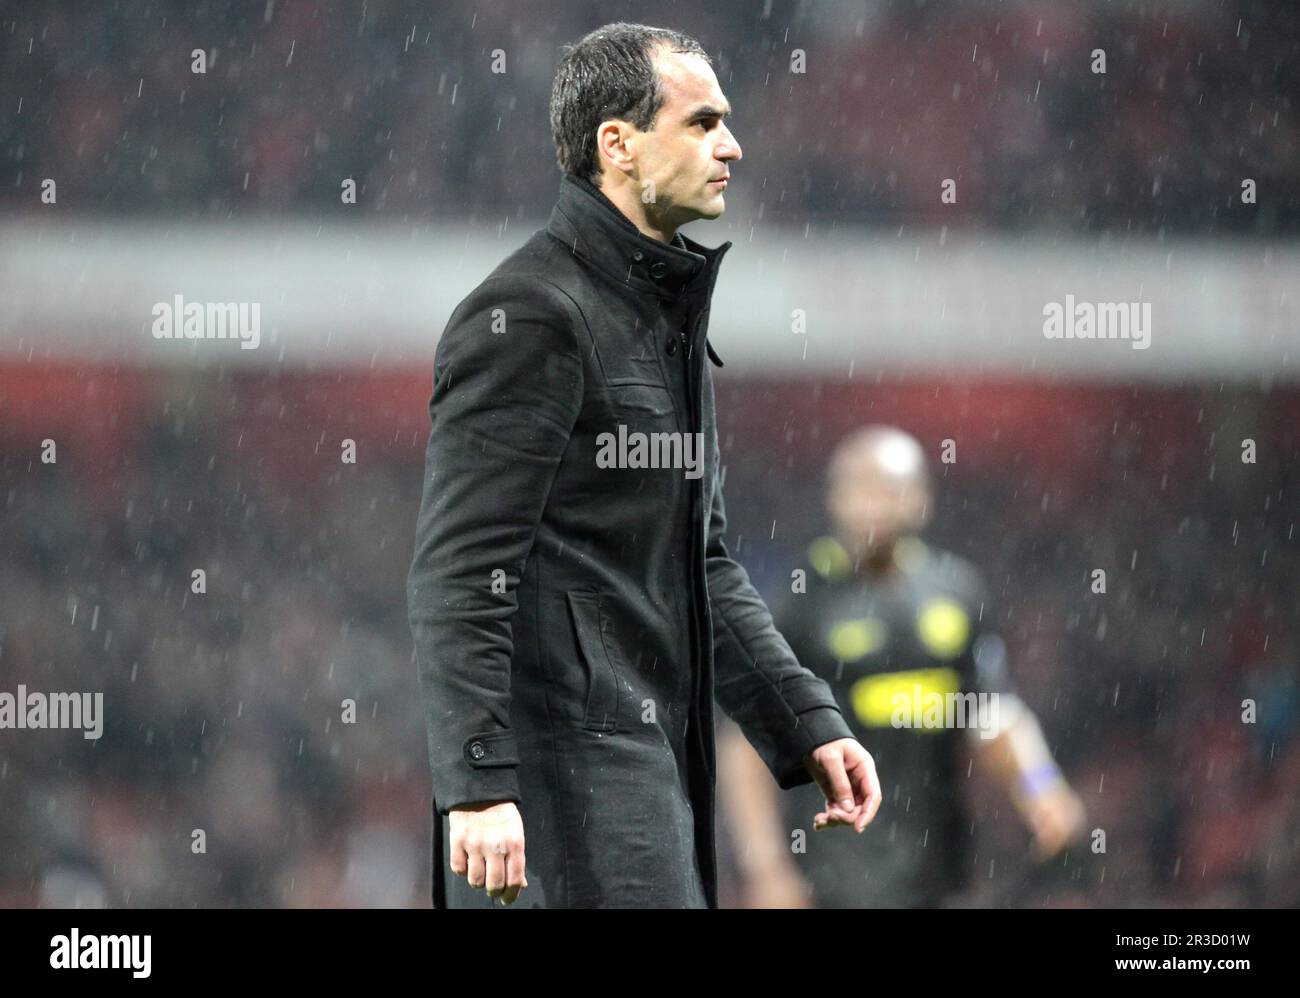 Wigan Athletic's Manager Roberto Martinez walks over to the fans to thank them for their support. Arsenal beat Wigan 4:1Arsenal 14/05/13 Arsenal V Wig Stock Photo